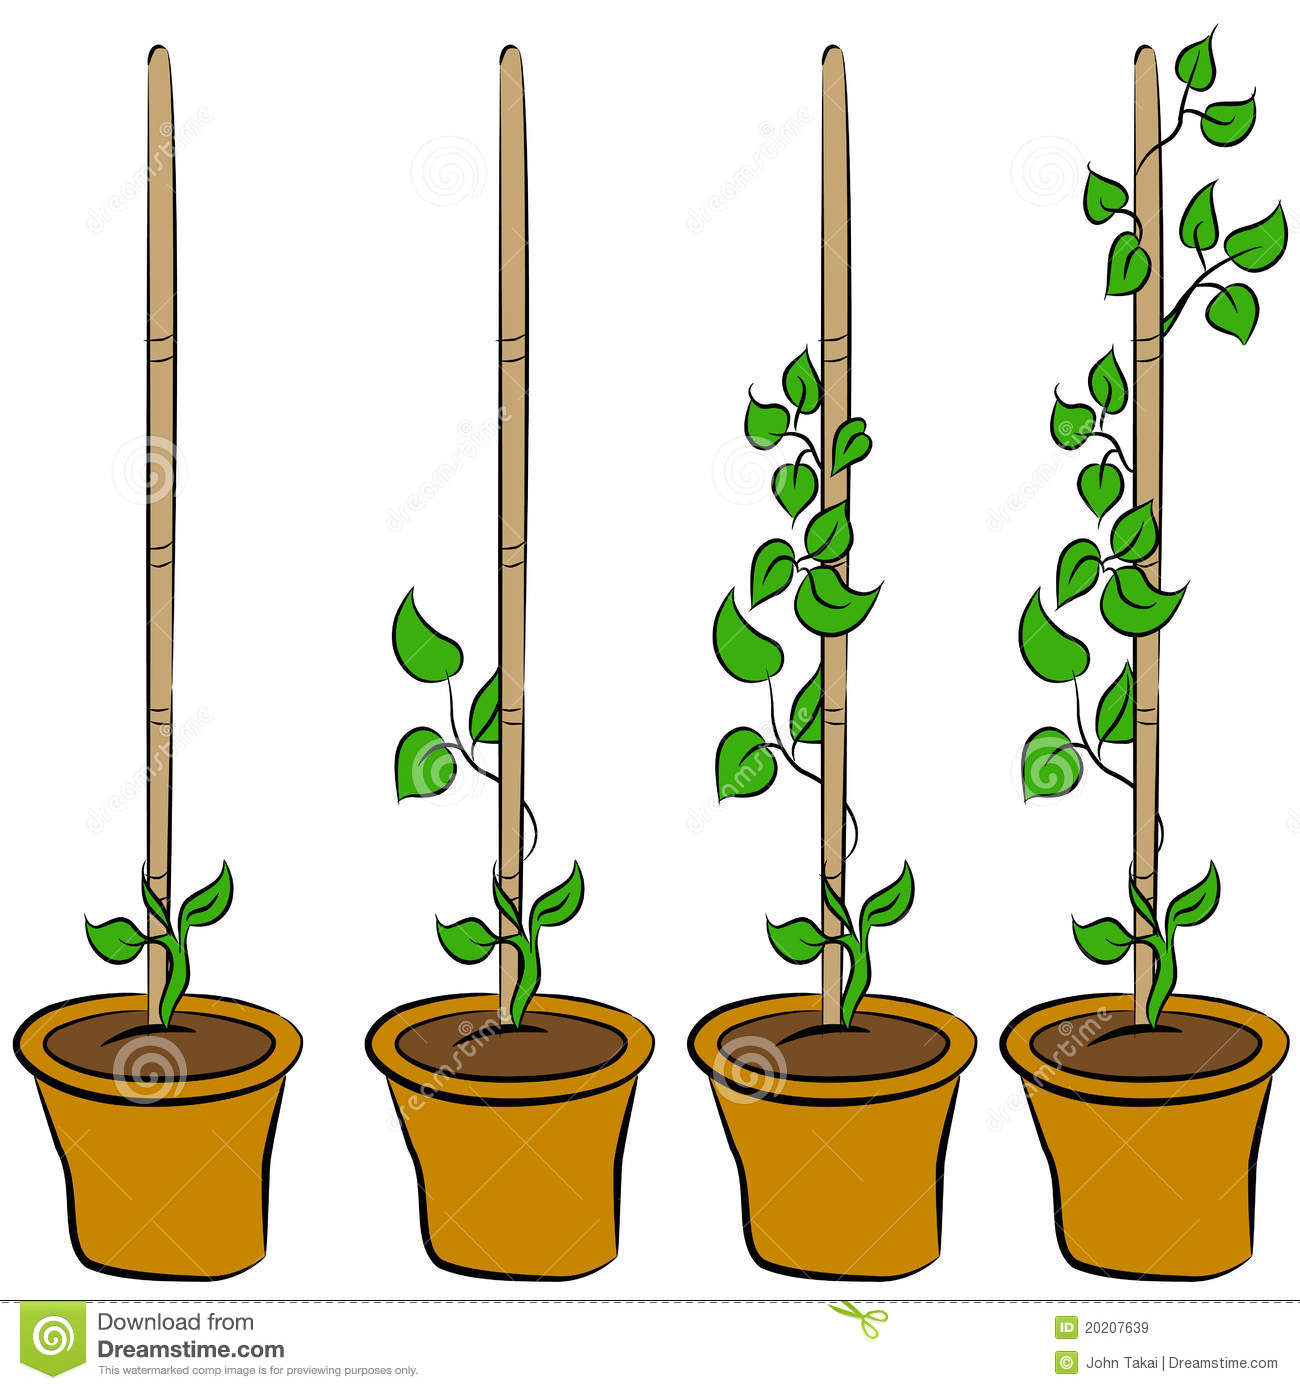 Growing Plant Stages Royalty Free Stock Images   Image  20207639